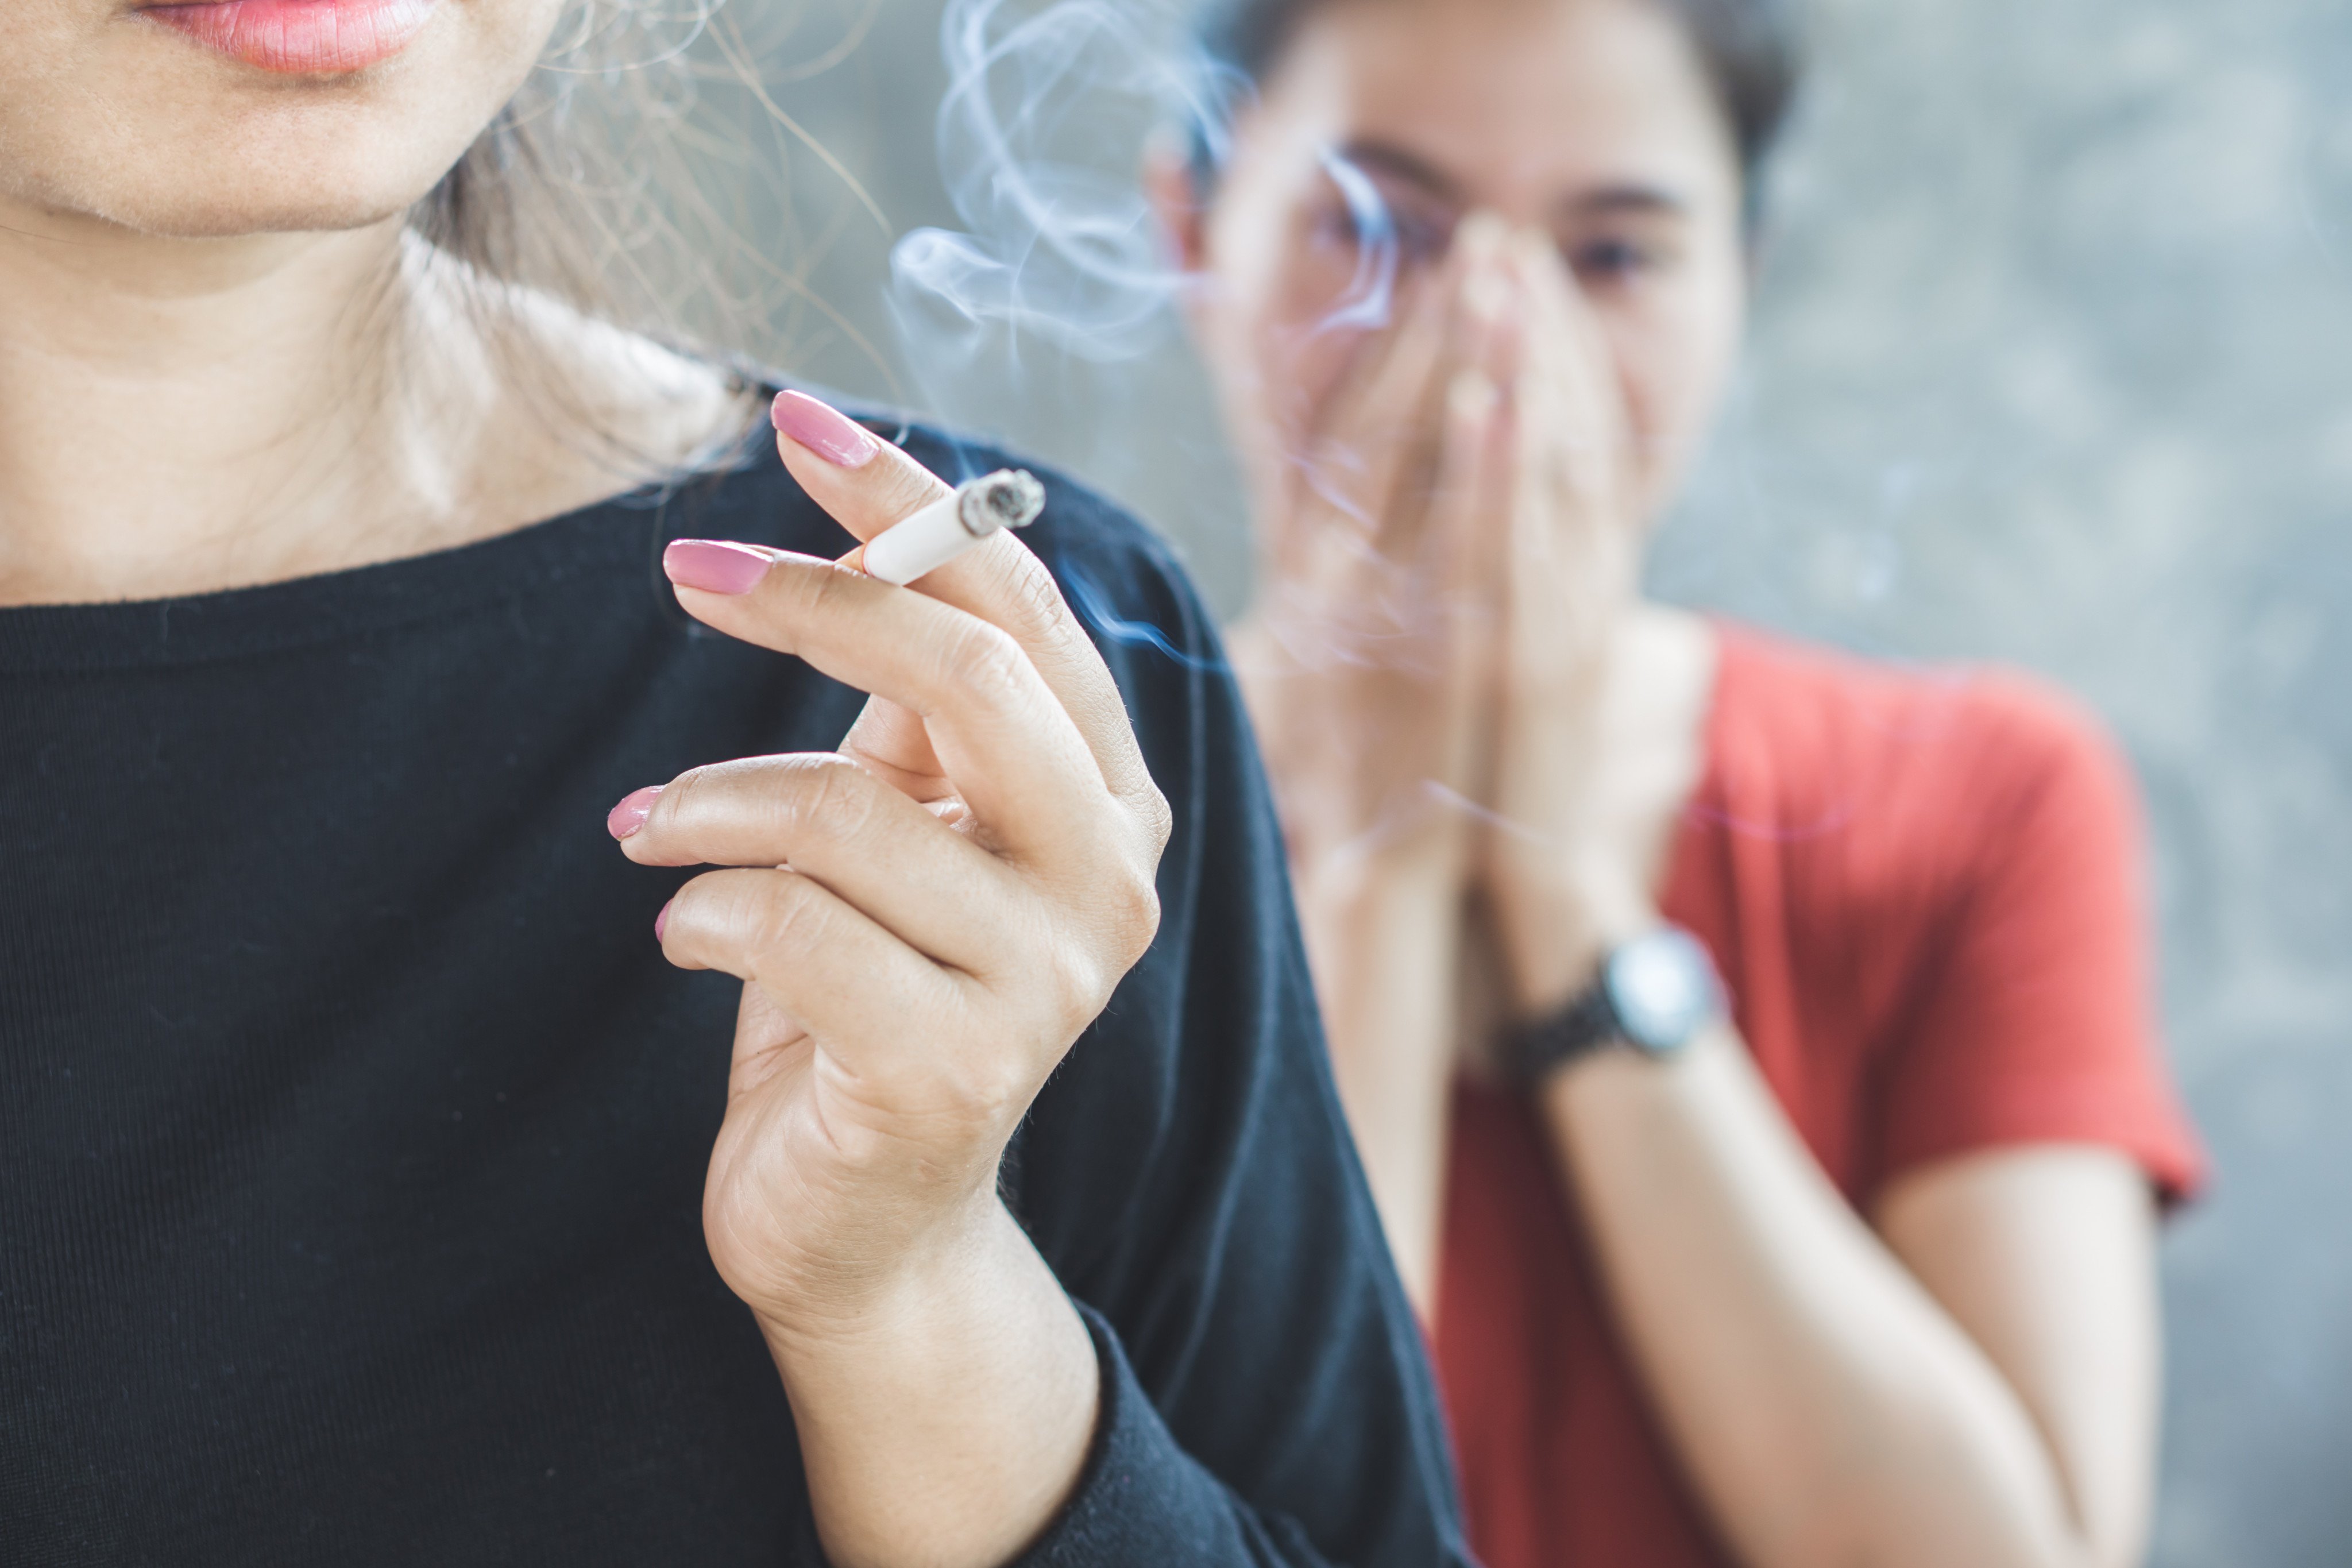 On World No Tobacco Day, we look at the dangers of smoking, and the lasting benefits of quitting and how quickly they start. Photo: Shutterstock